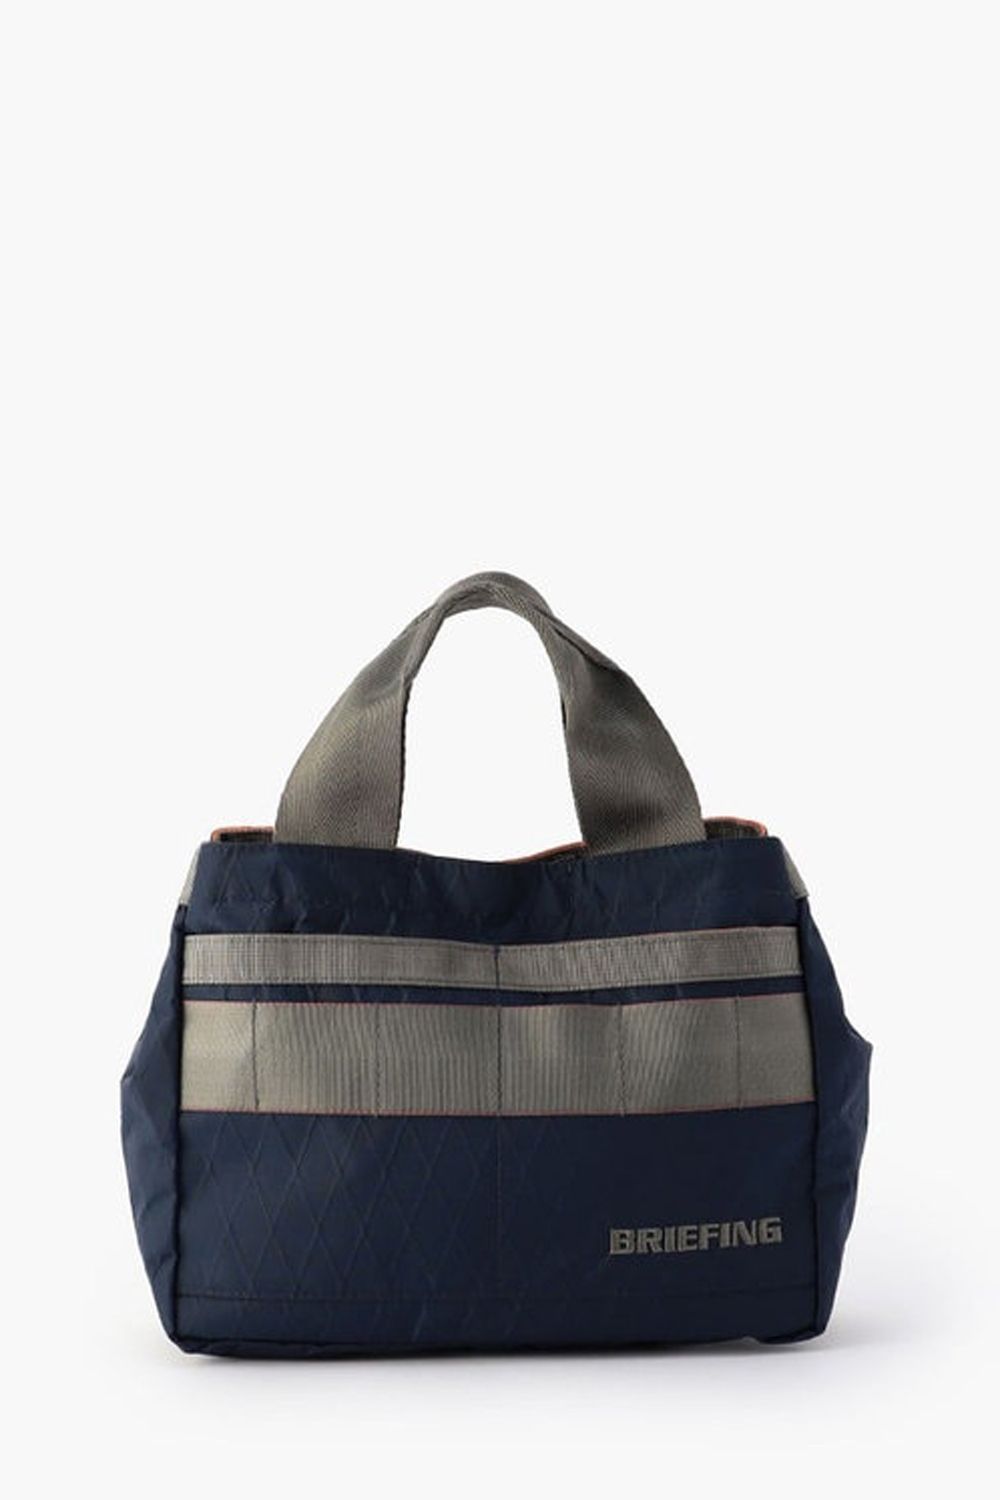 BRIEFING - 【MIL COLLECTION】 CART TOTE XP WOLF GRAY / ダイヤ 